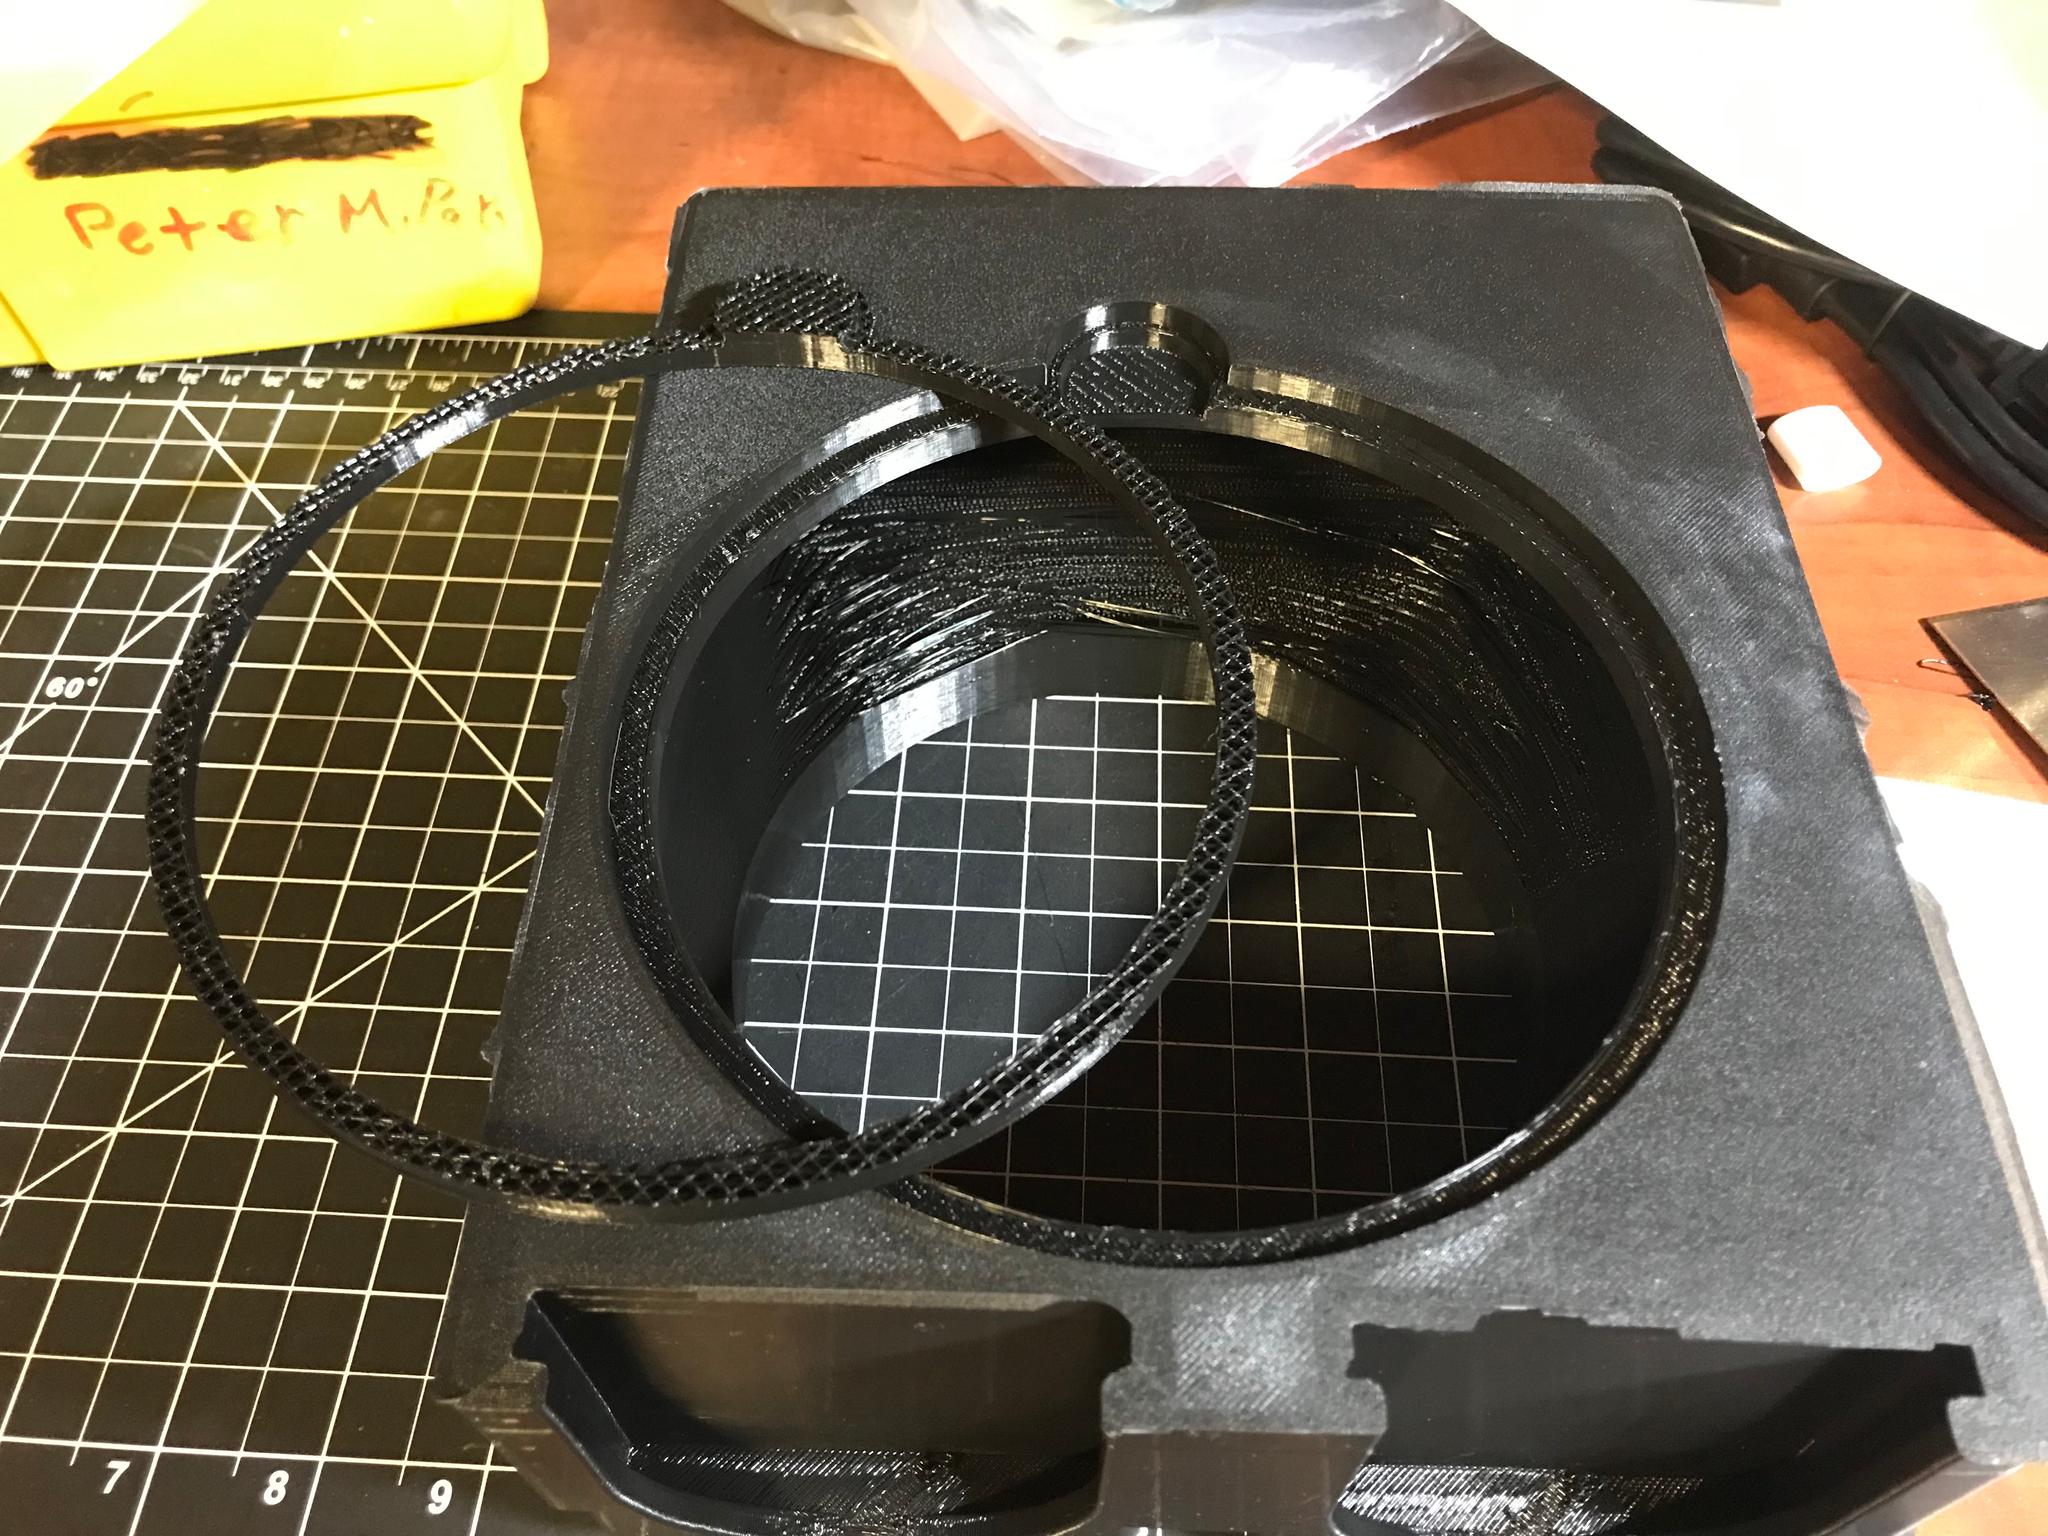 View of print with support cleanly removed.